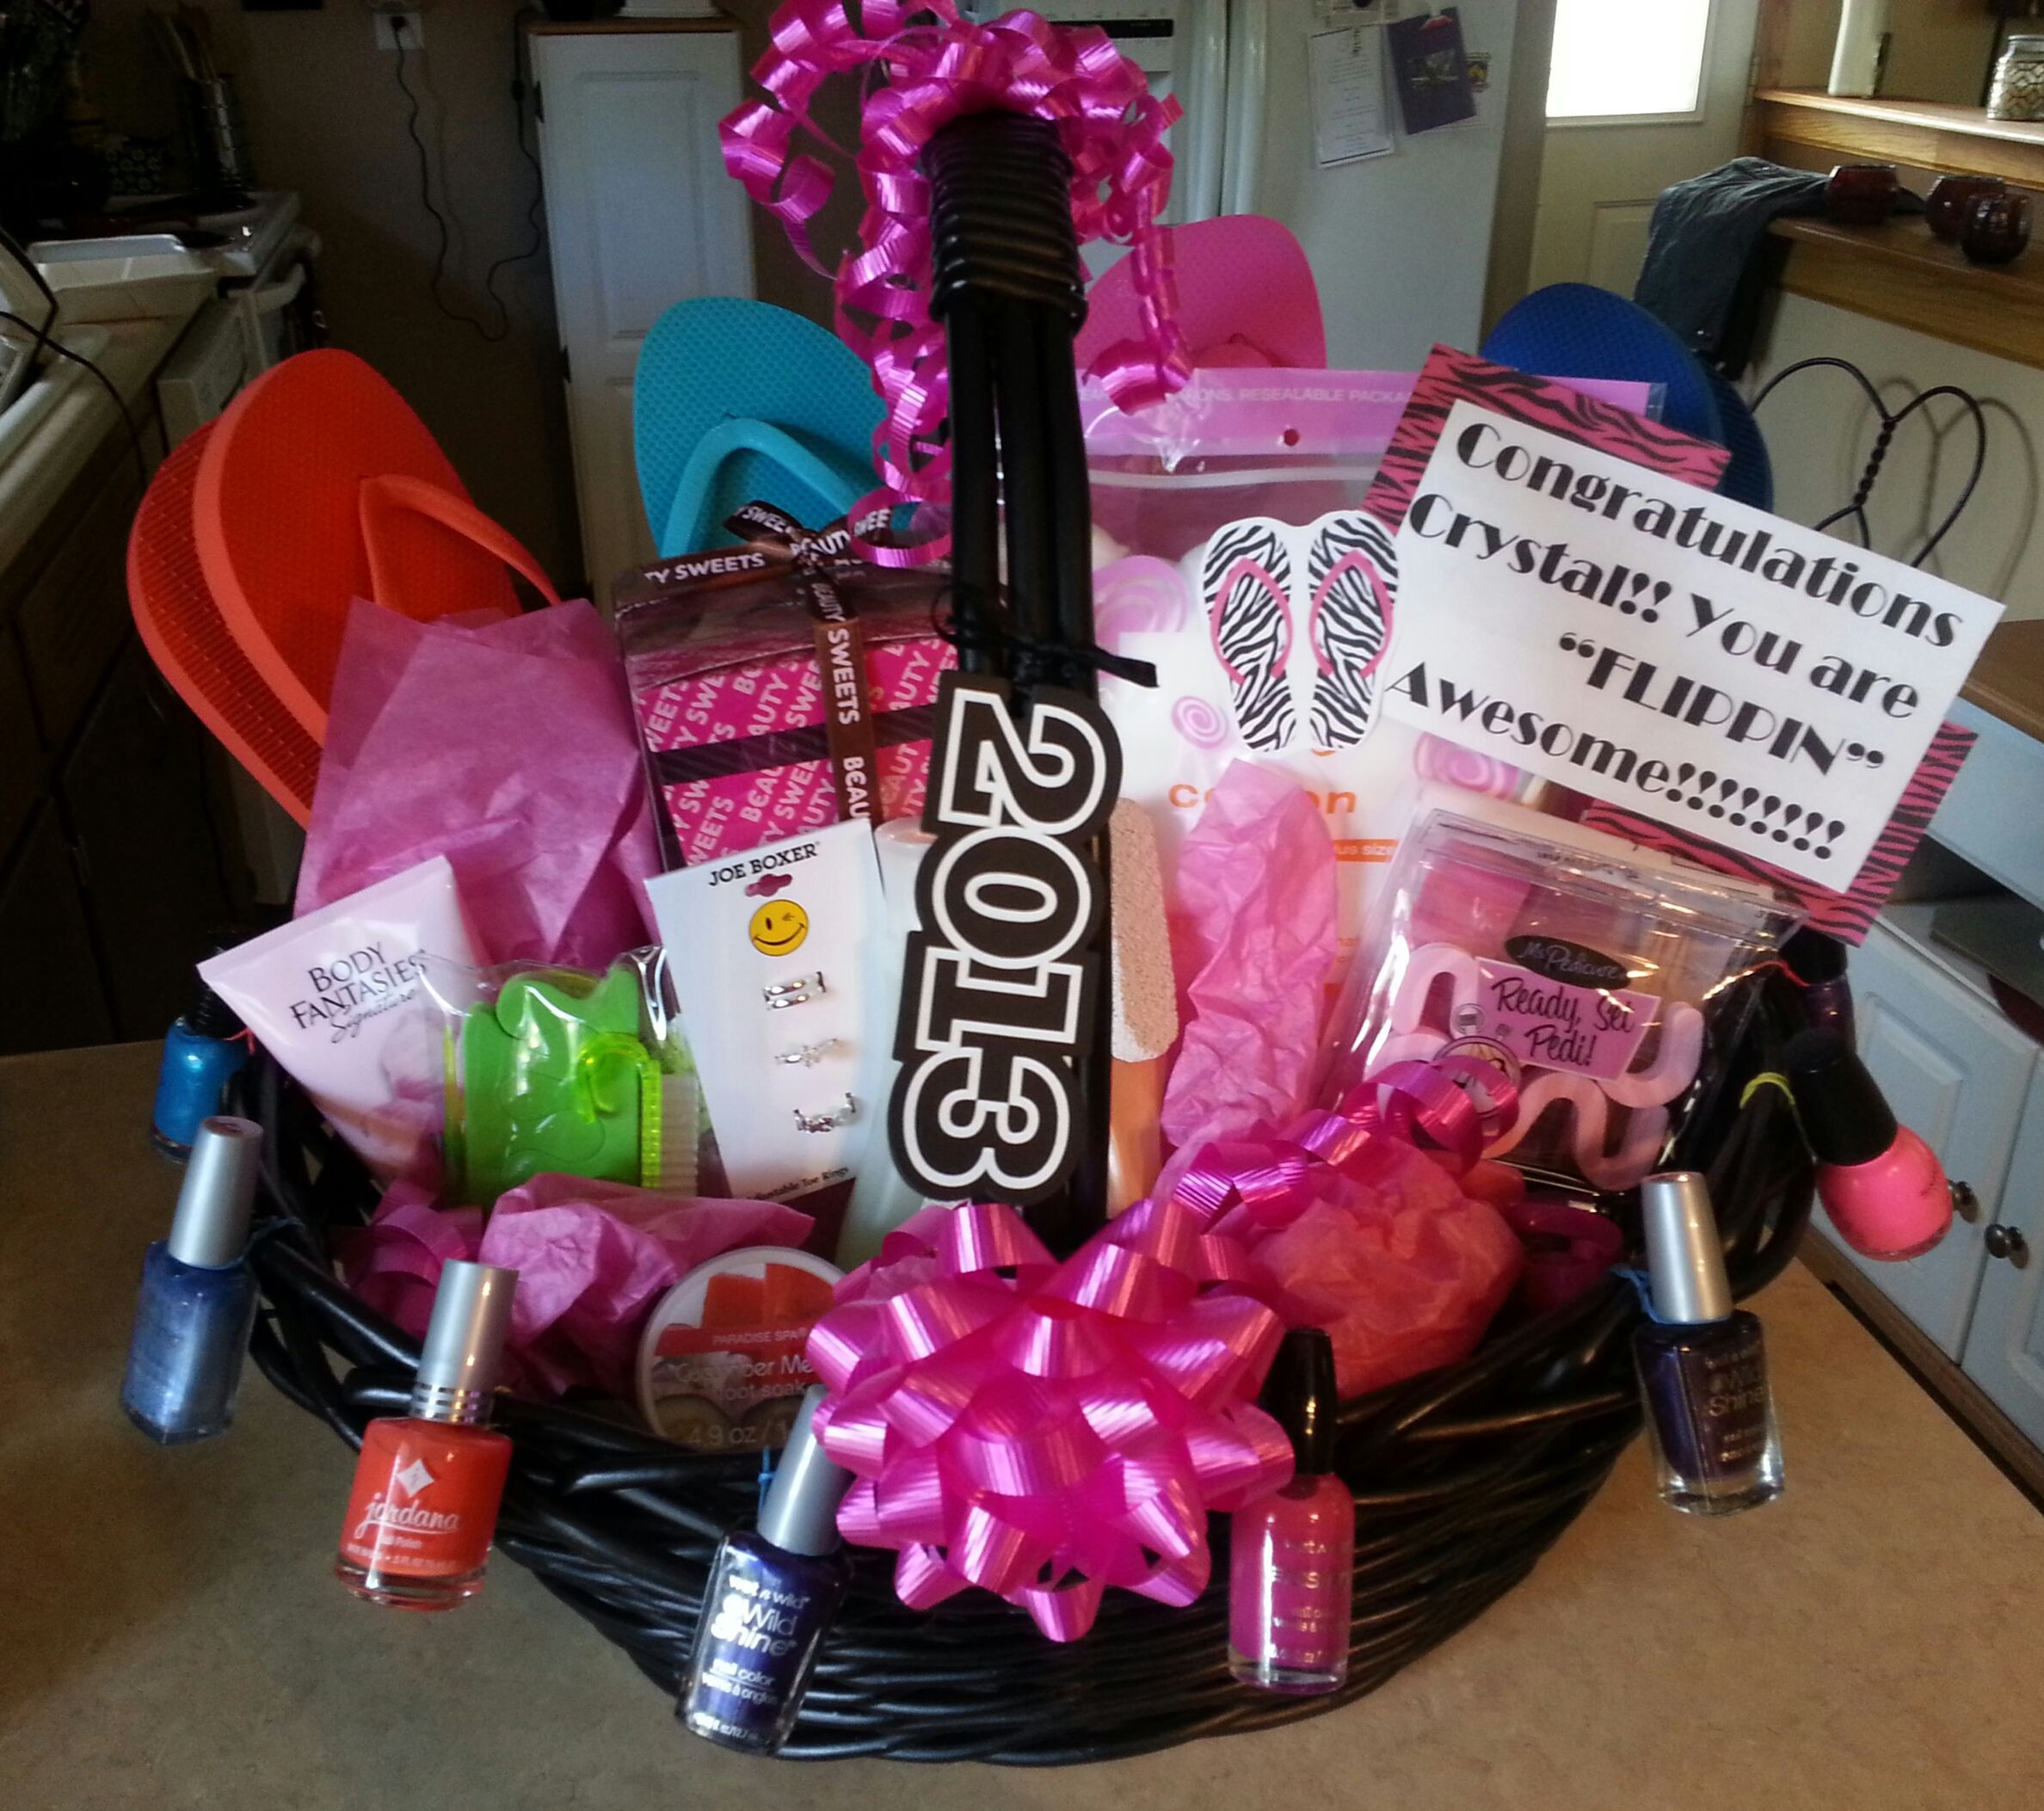 Girl High School Graduation Gift Ideas
 Great Graduation Gift for a girl Made this one for my